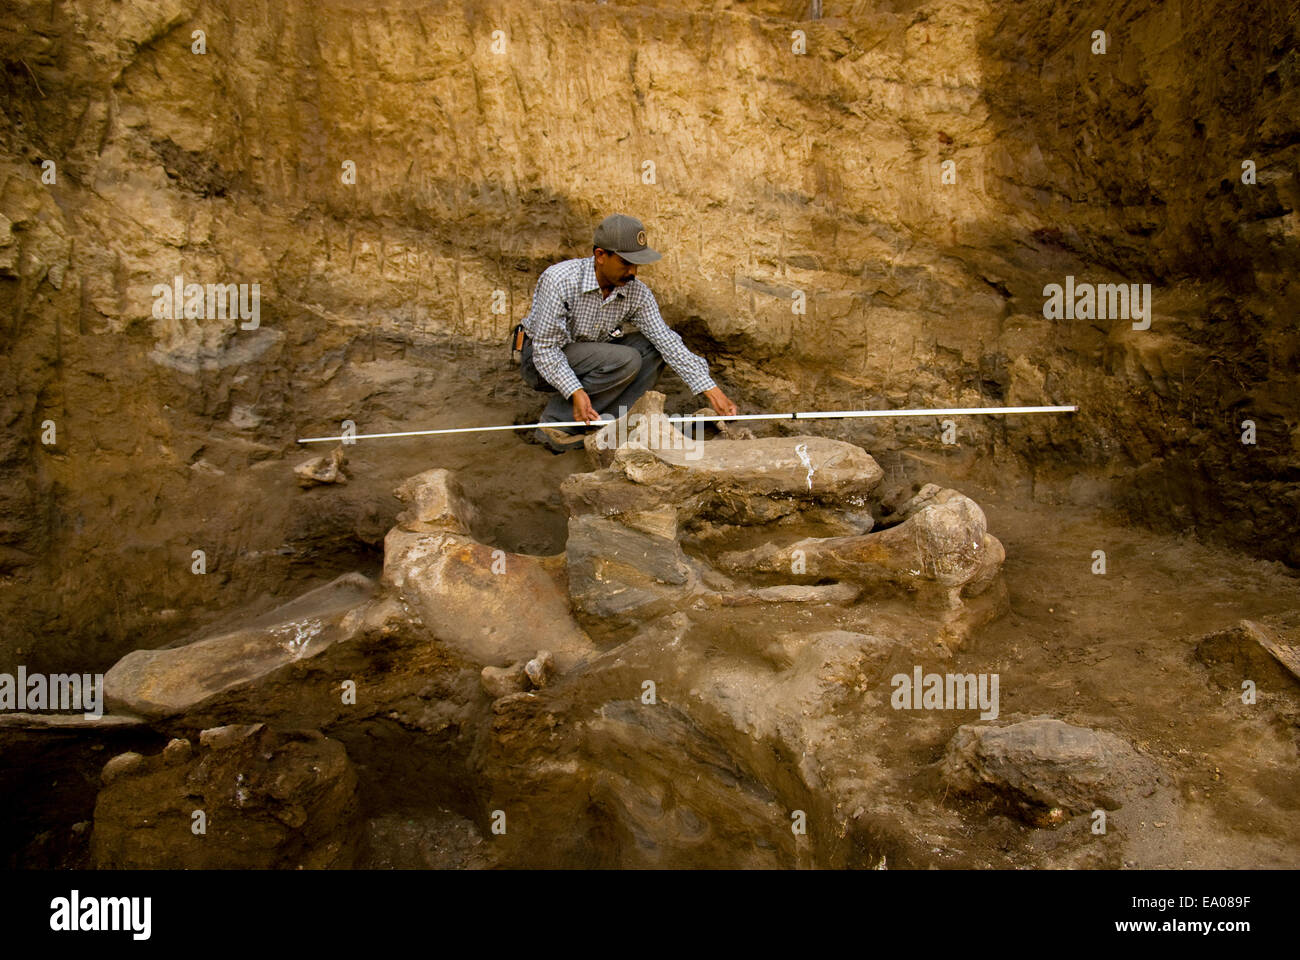 Paleontologist Iwan Kurniawan is working on the excavation site of an extinct elephant, Elephas hysudrindicus, in Blora, Central Java, Indonesia. Stock Photo